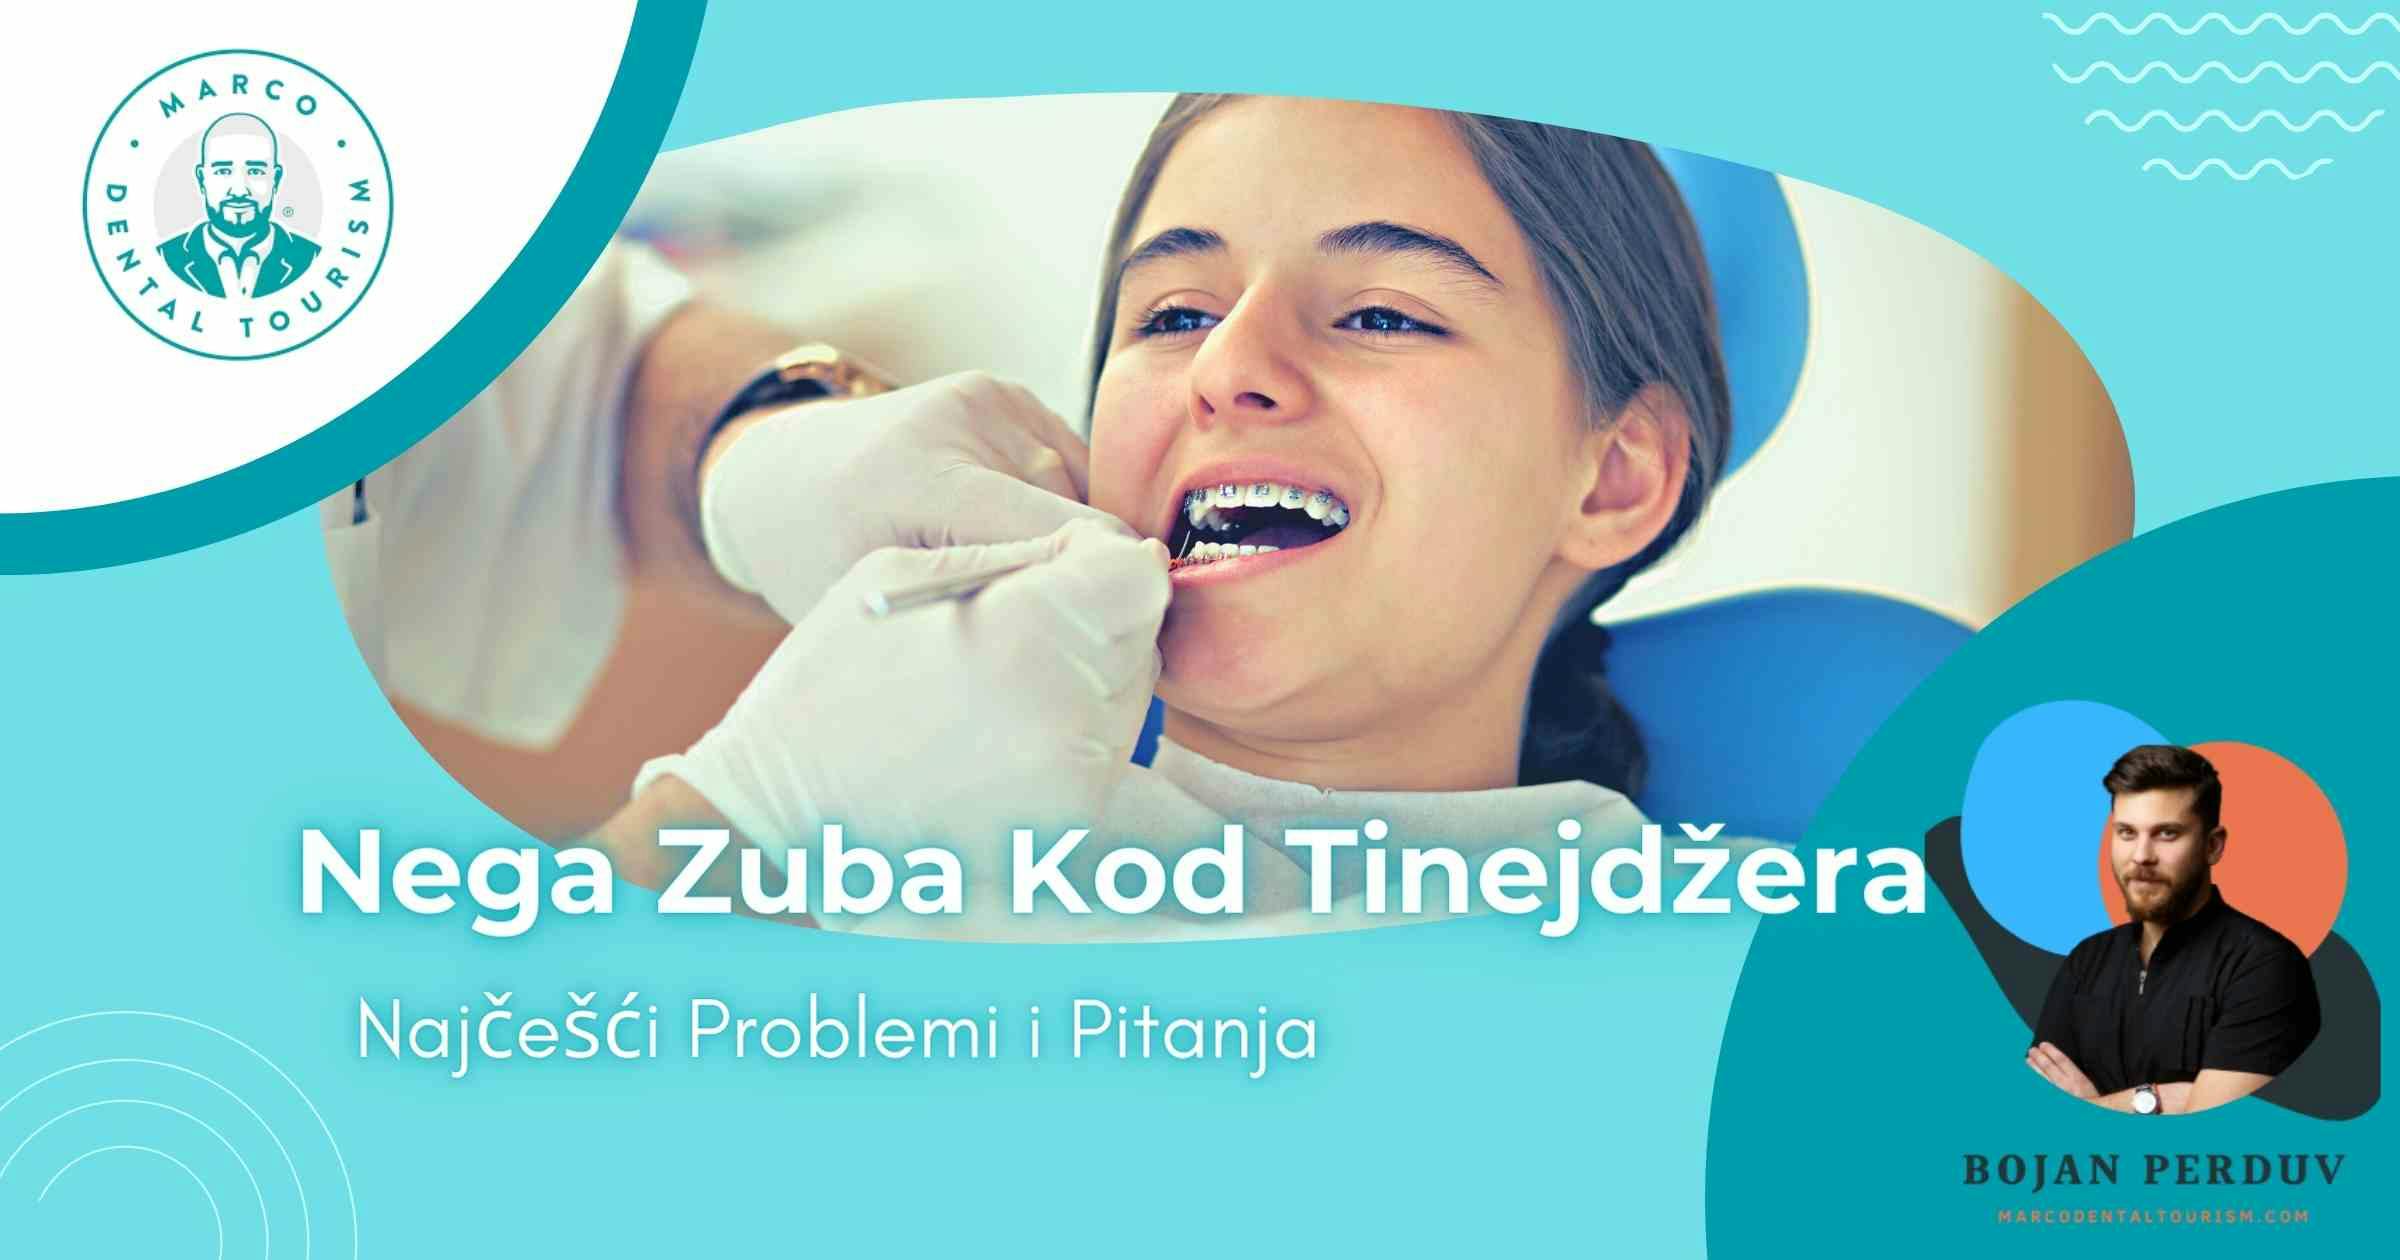 Teen Dental Care: The Most Common Problems and Questions